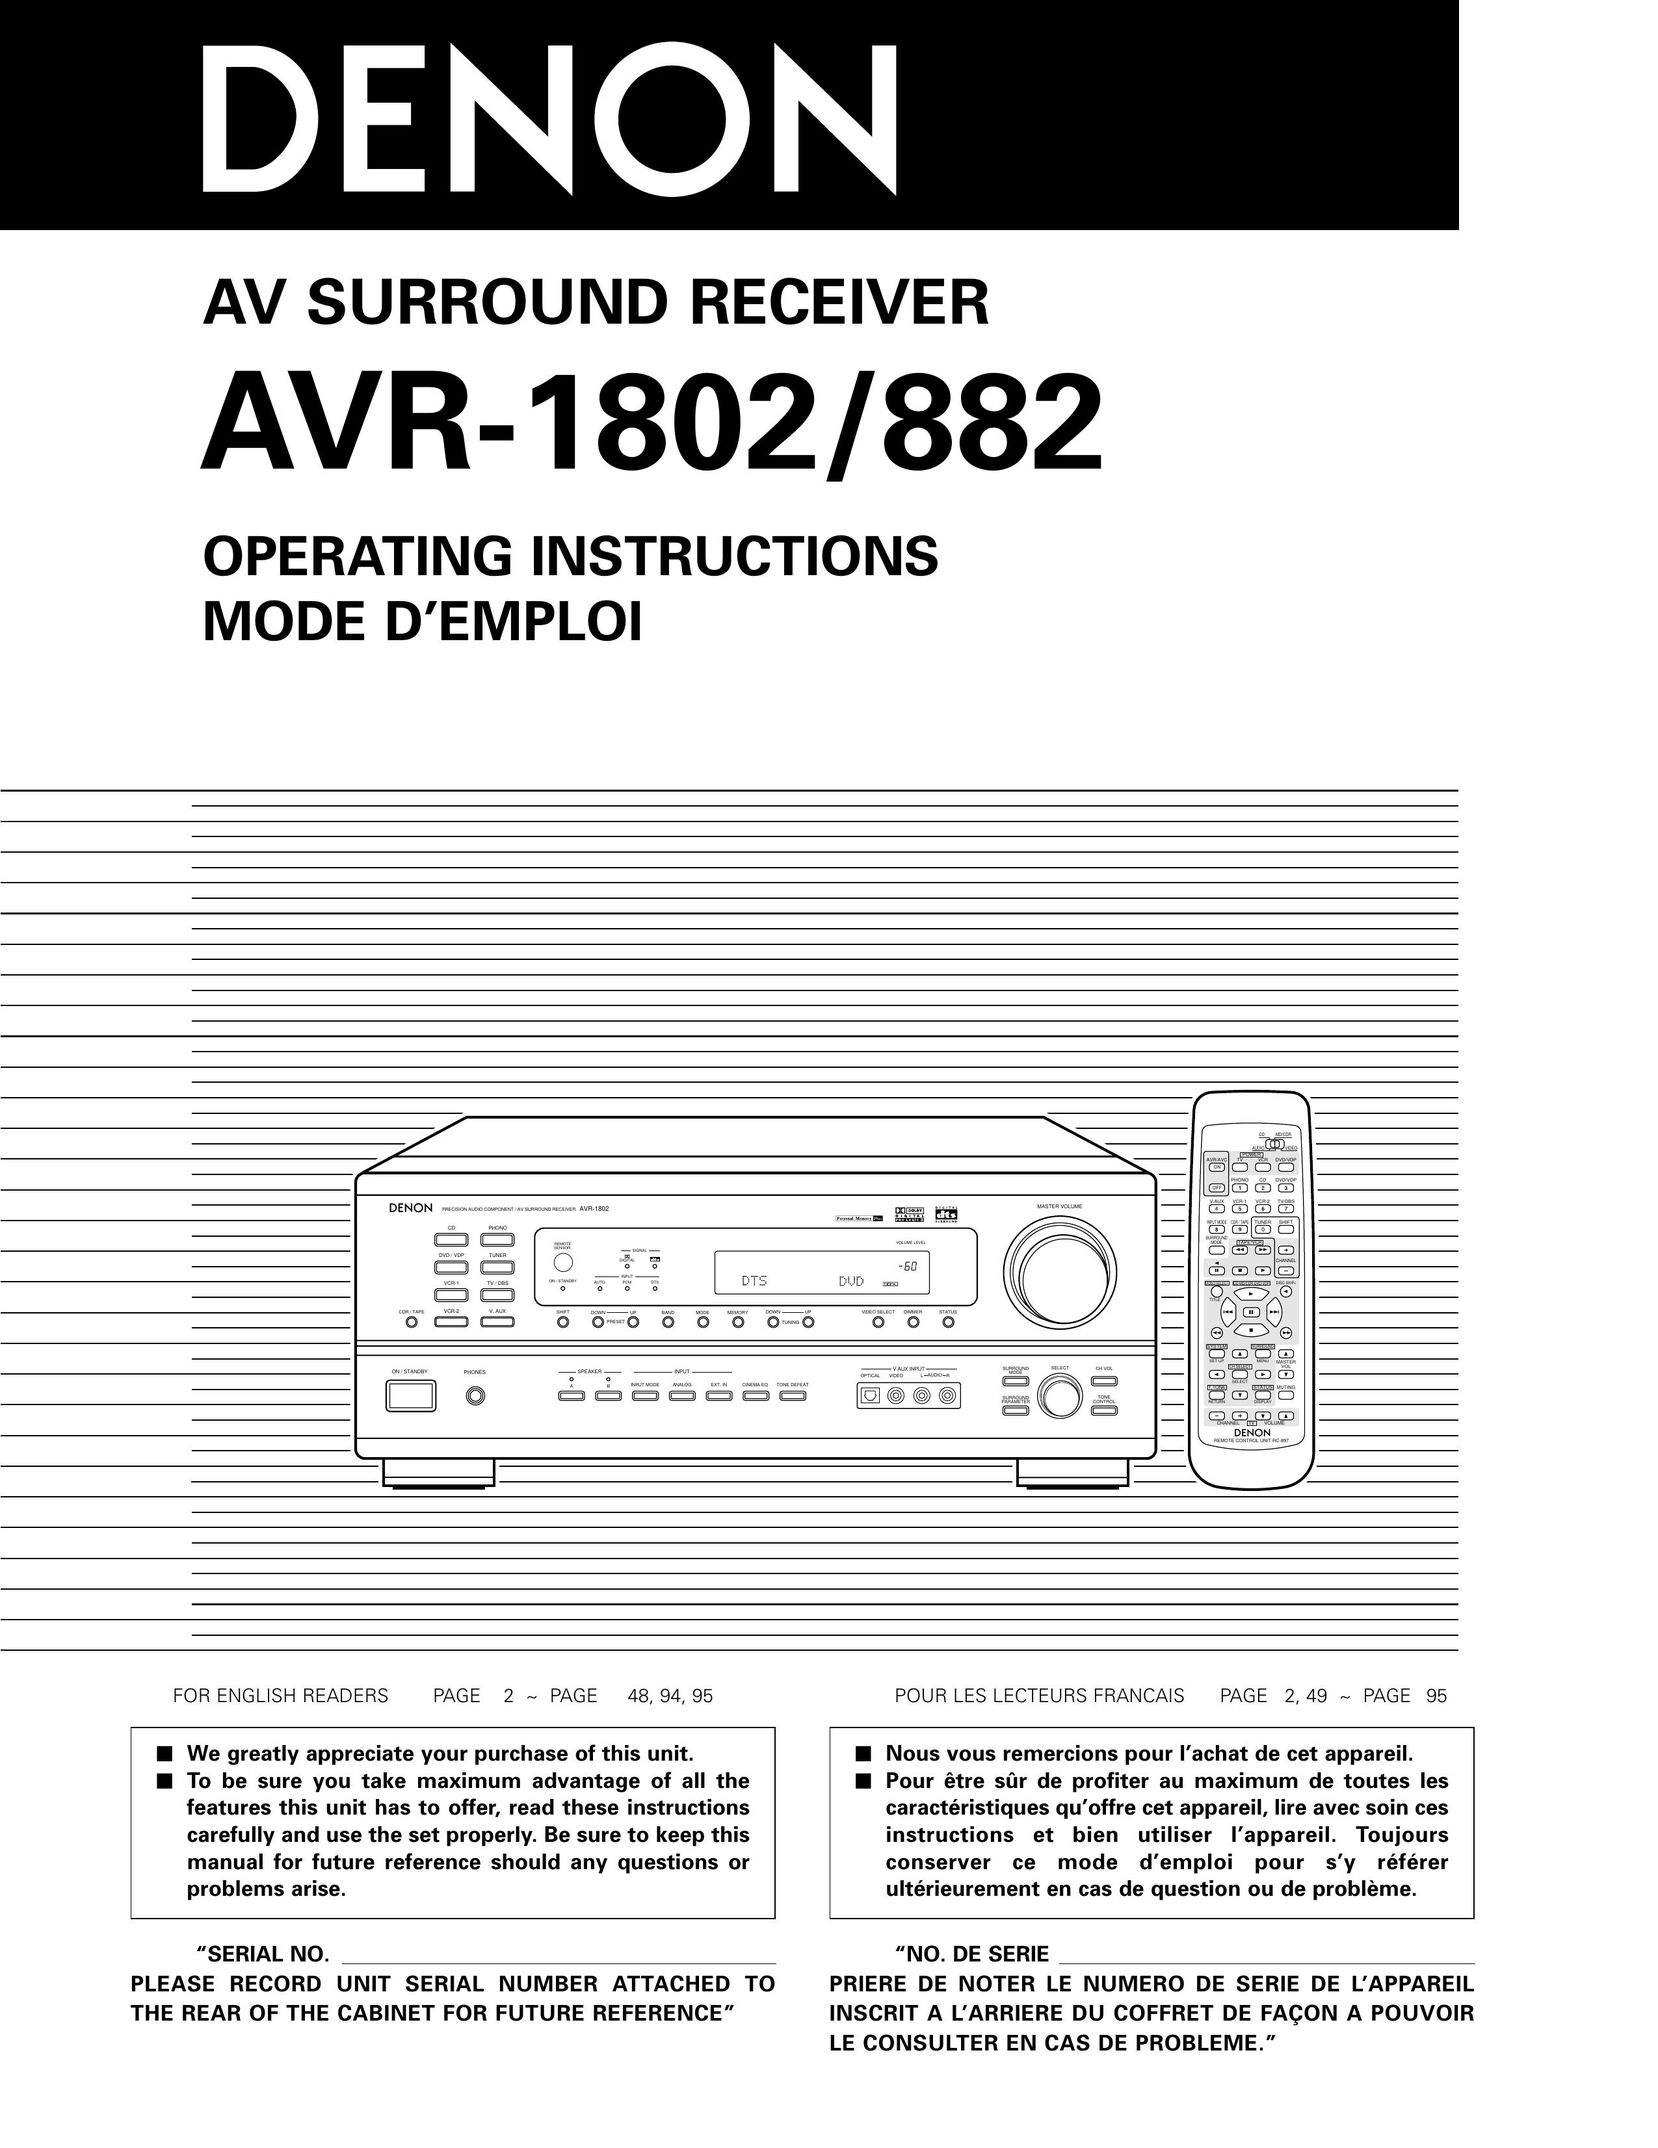 Denon AVR-1802/882 Home Theater System User Manual